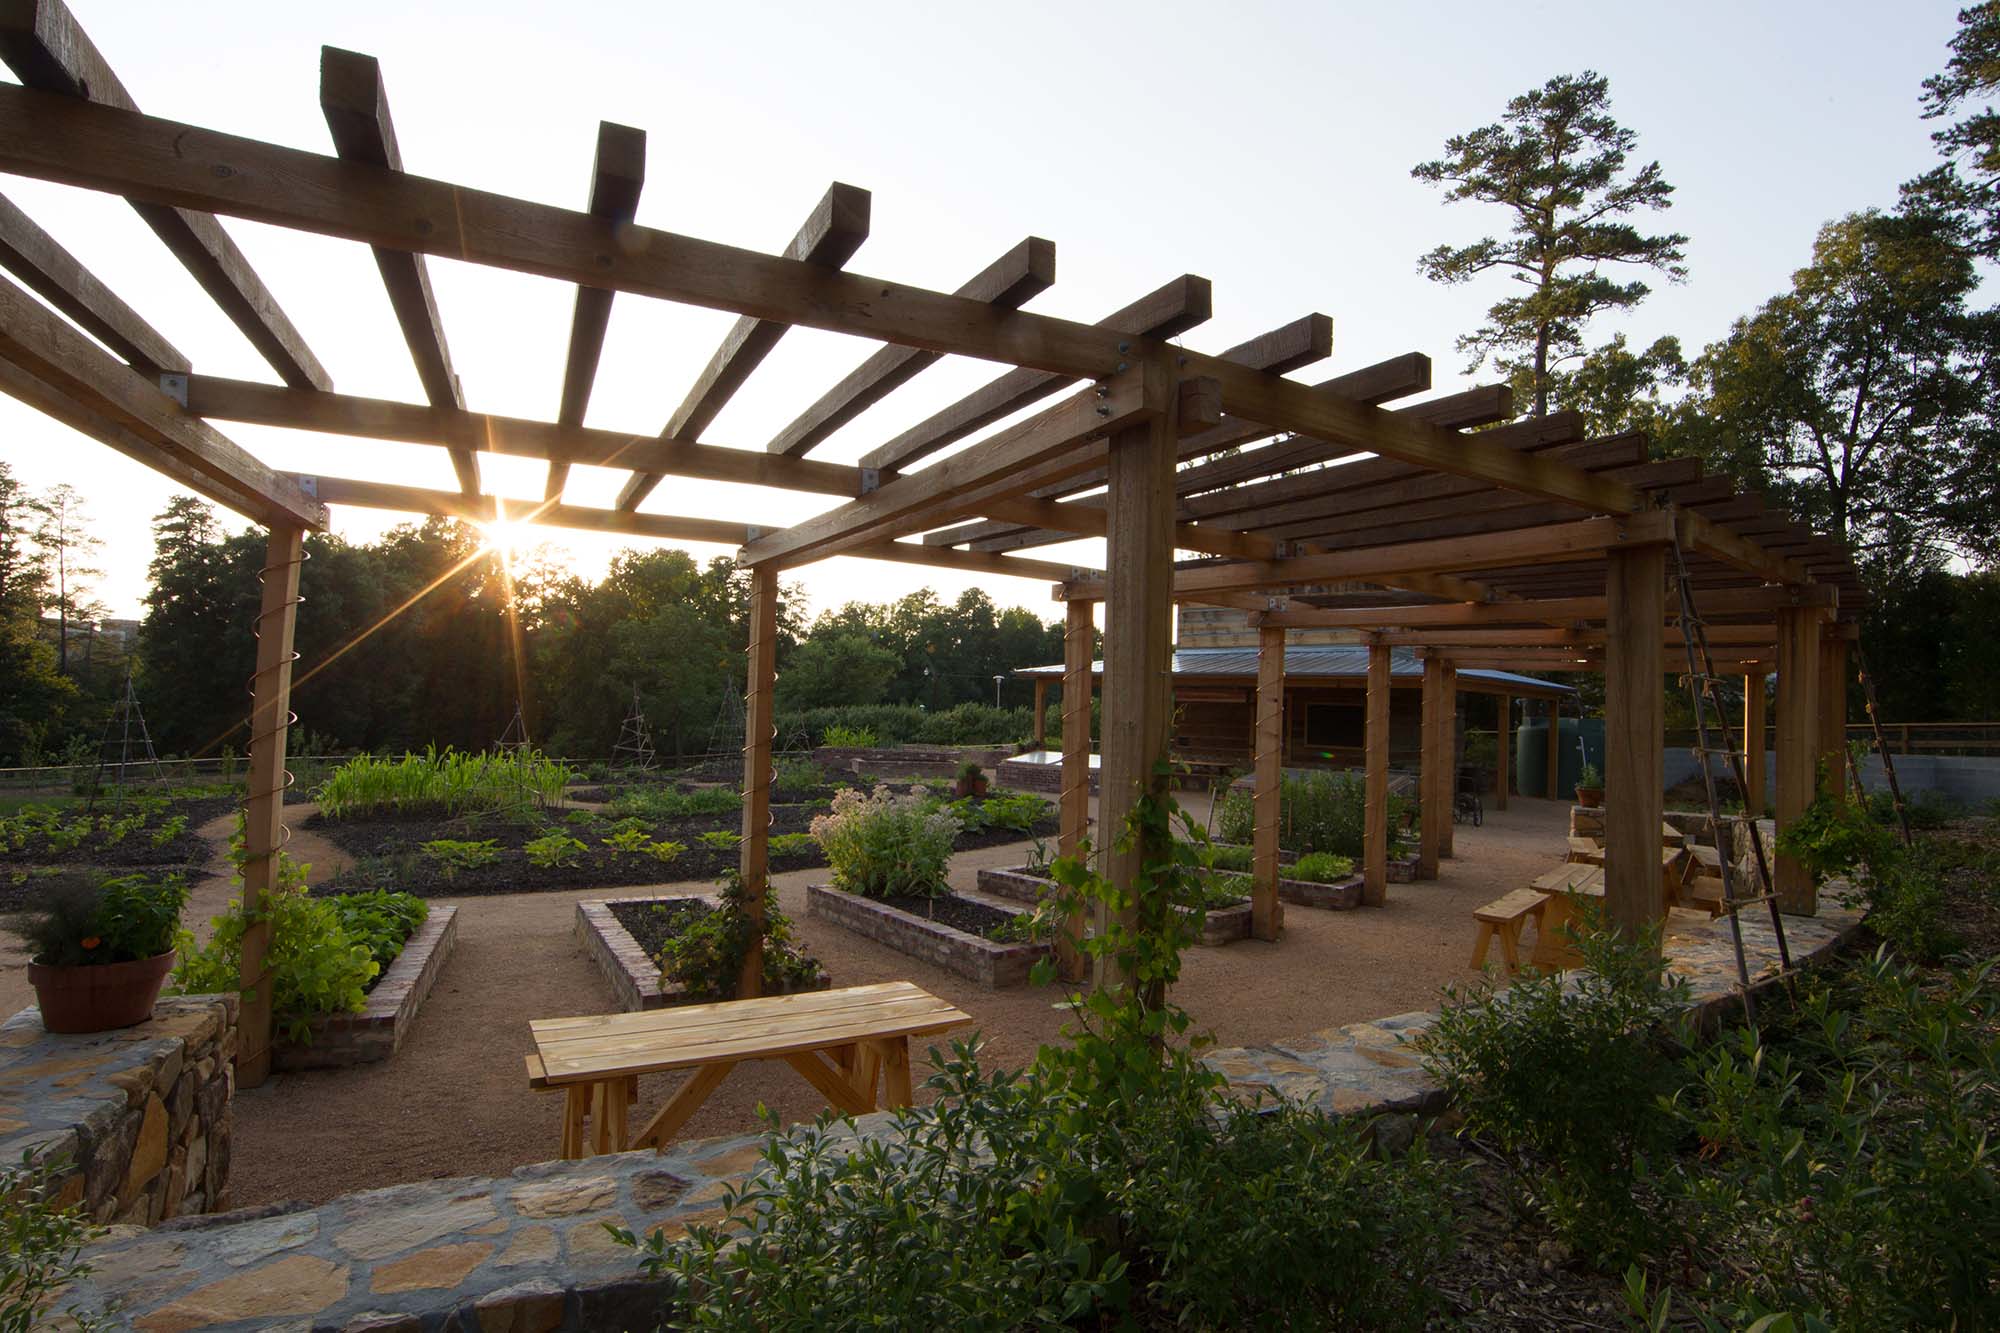 The Charlotte Brody Discovery Garden, a sustainable, organic food garden. Photo by Rick Fisher.